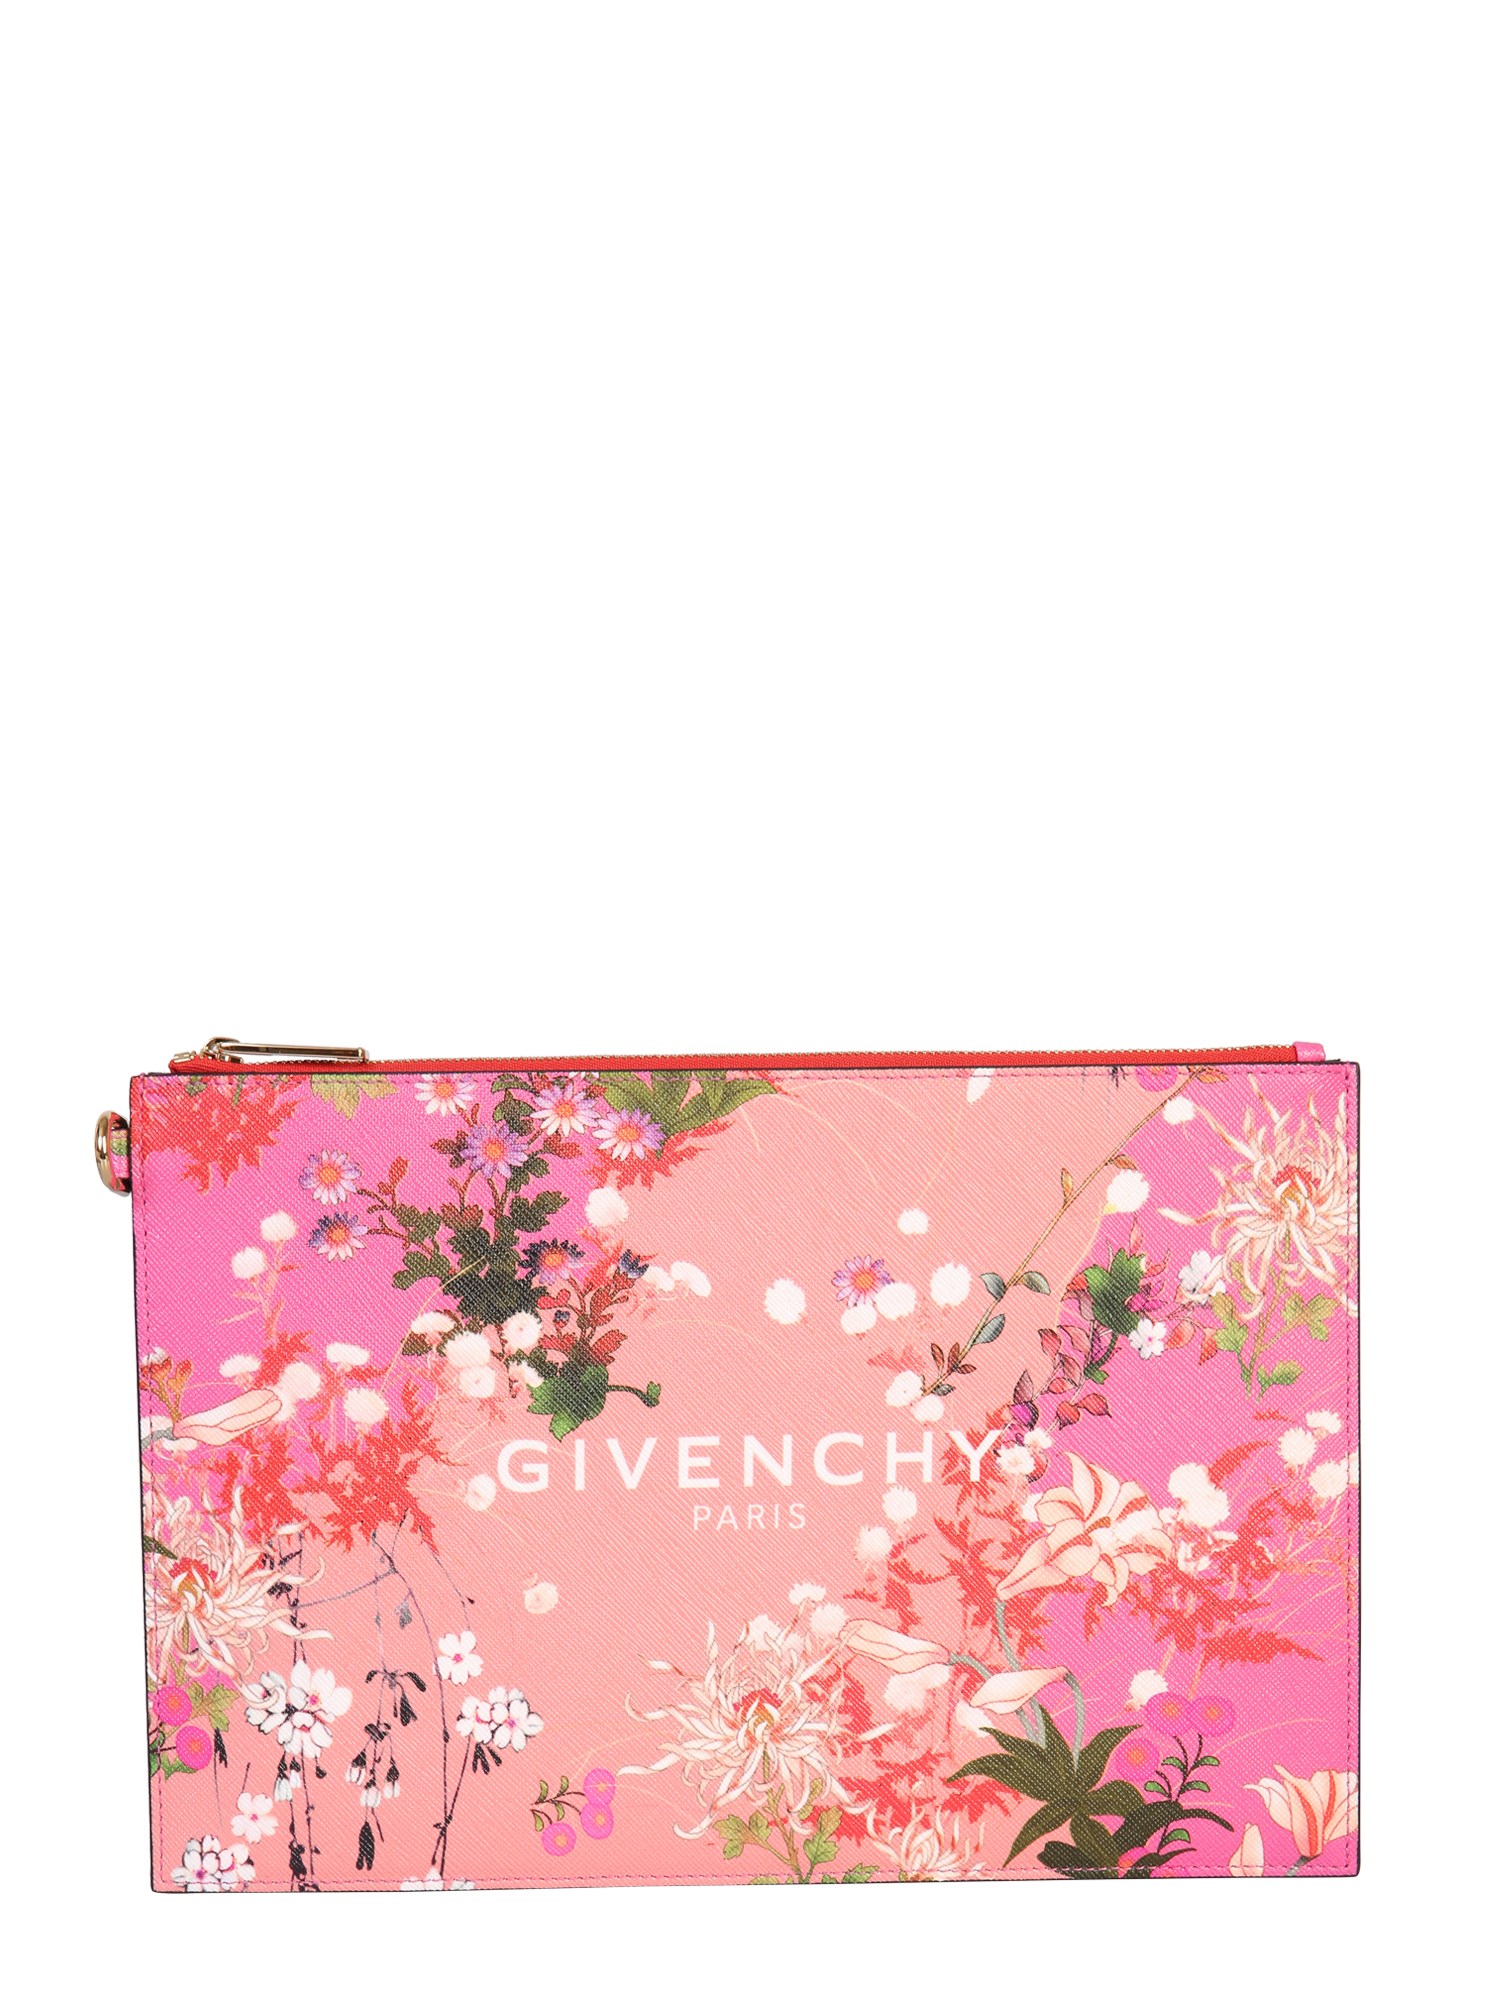 GIVENCHY MEDIUM POUCH WITH LOGO,175100